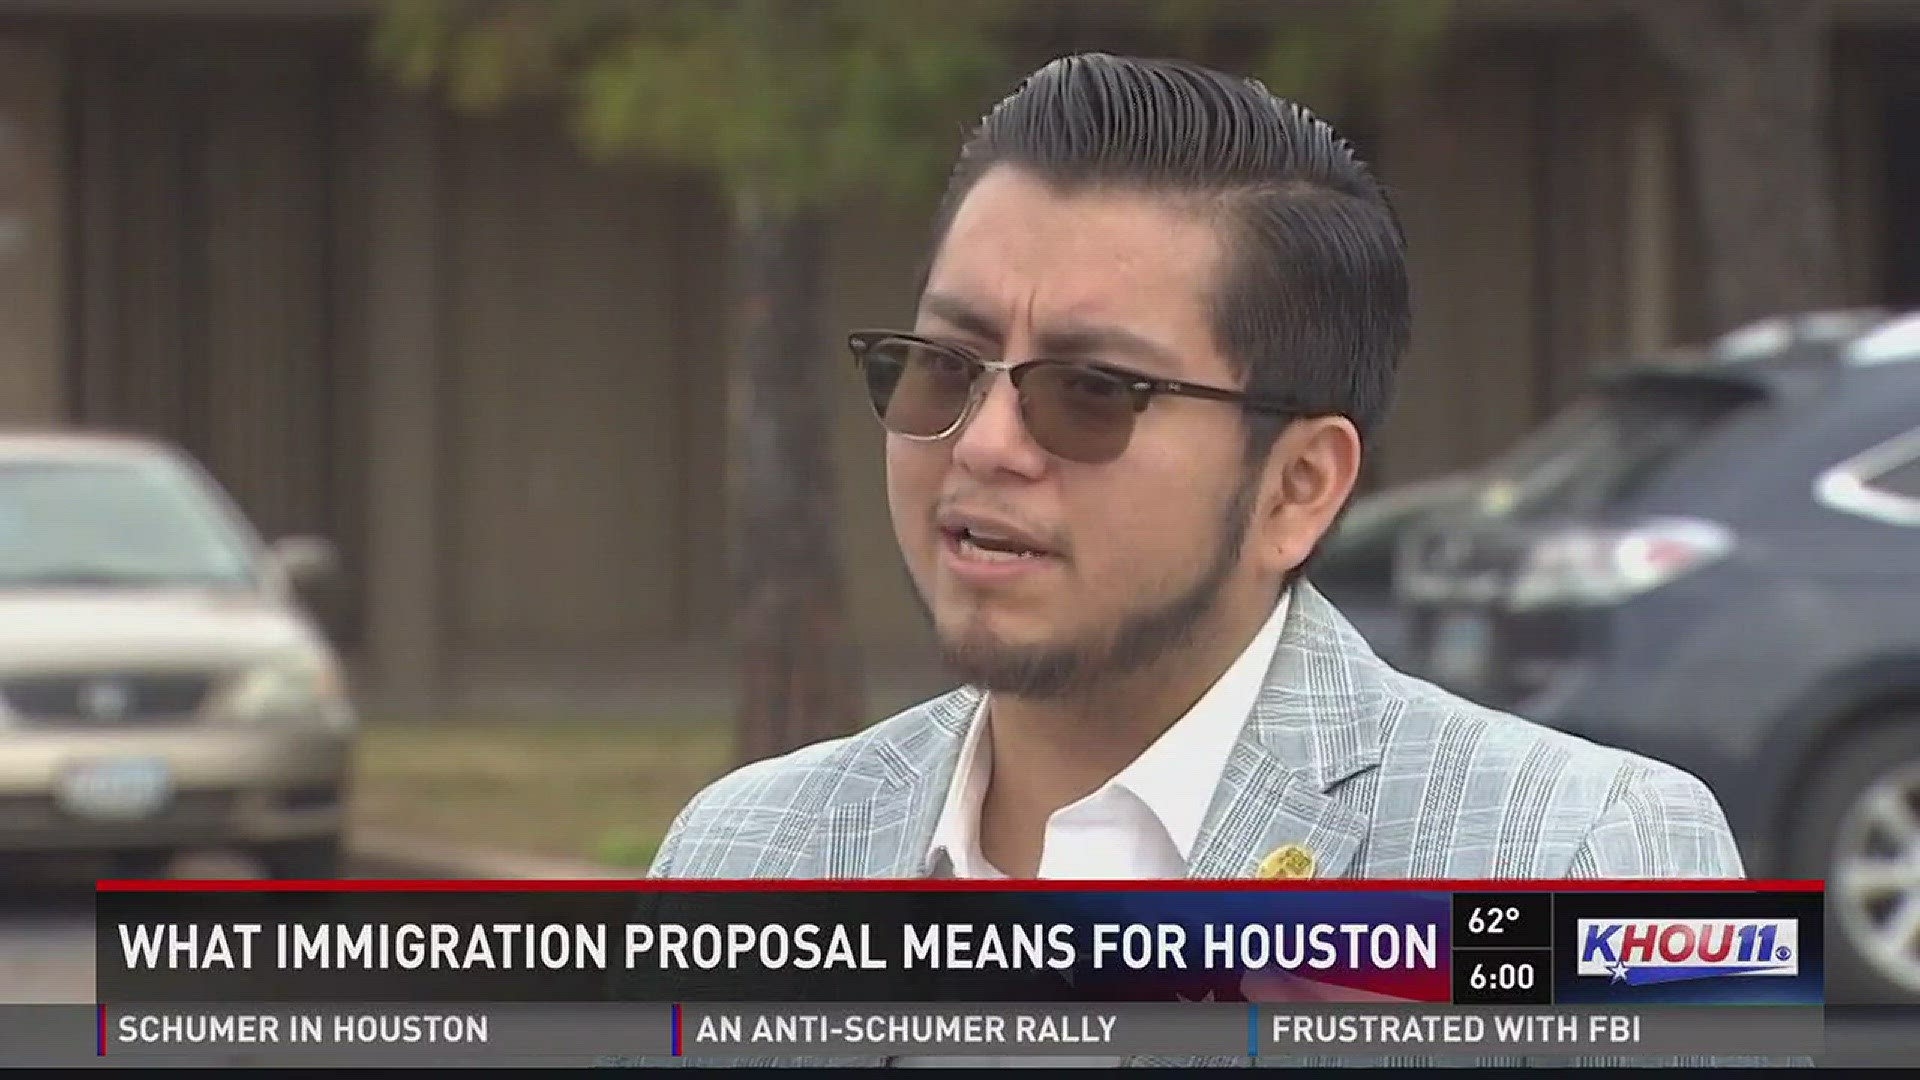 Local DACA recipients are reacting to the Trump administration's proposed immigration plan that could help set up a path to citizenship for them.